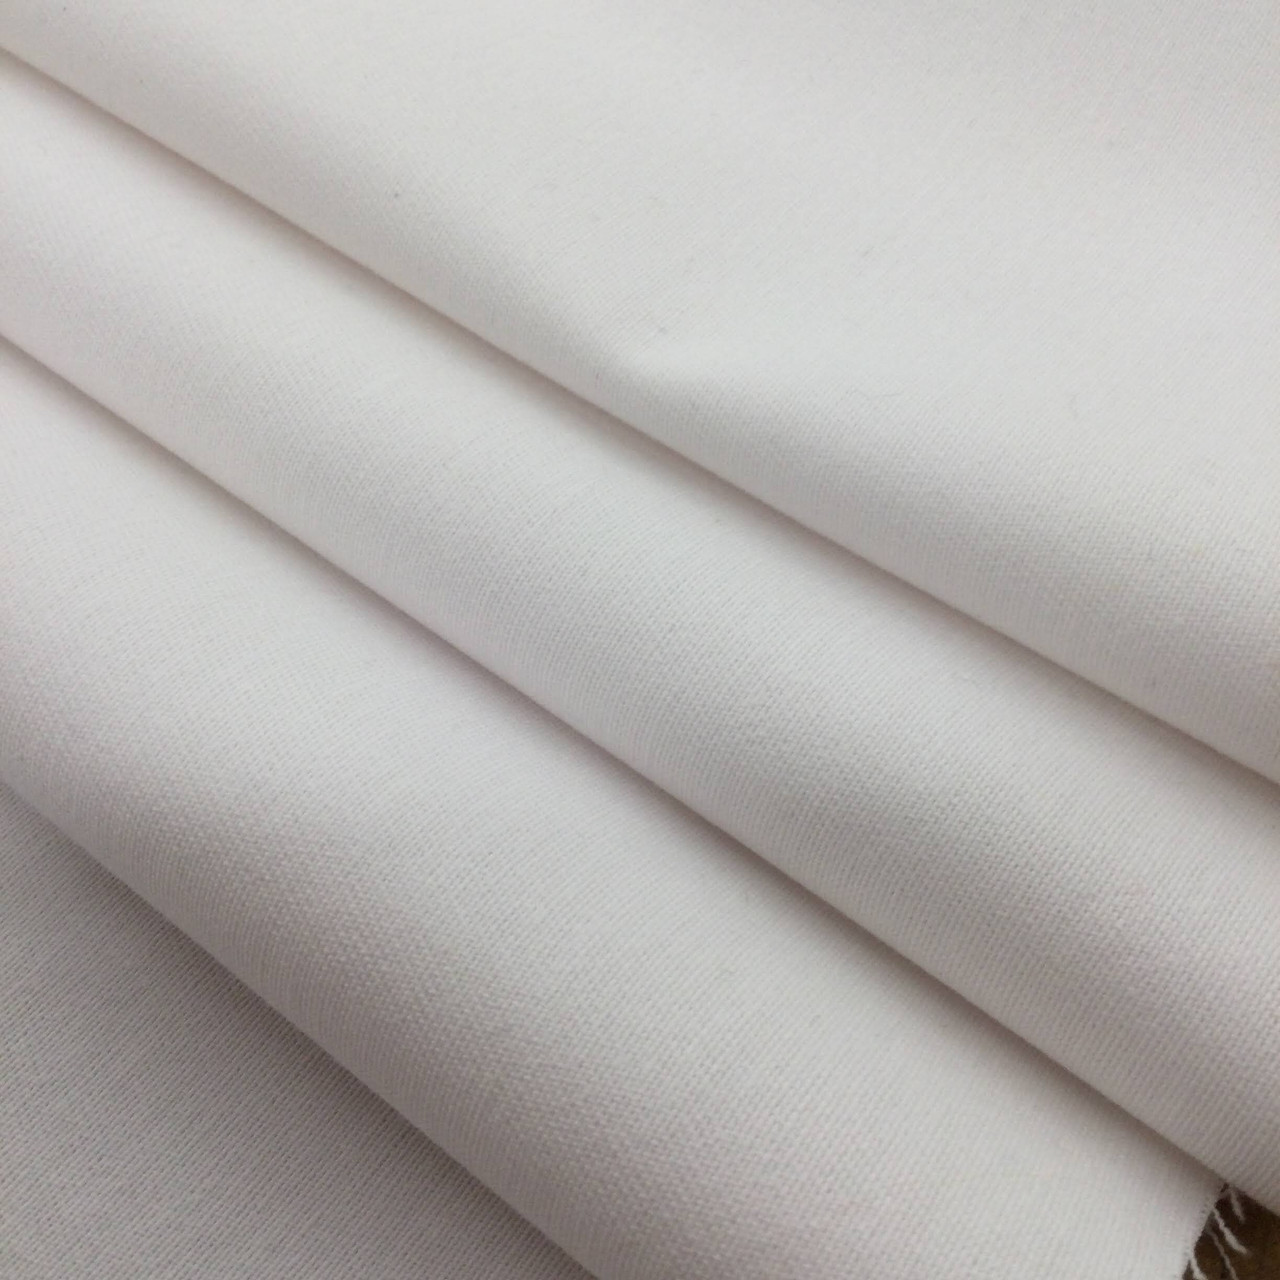 100% Cotton Lining - White Twill 60 - By the Yard